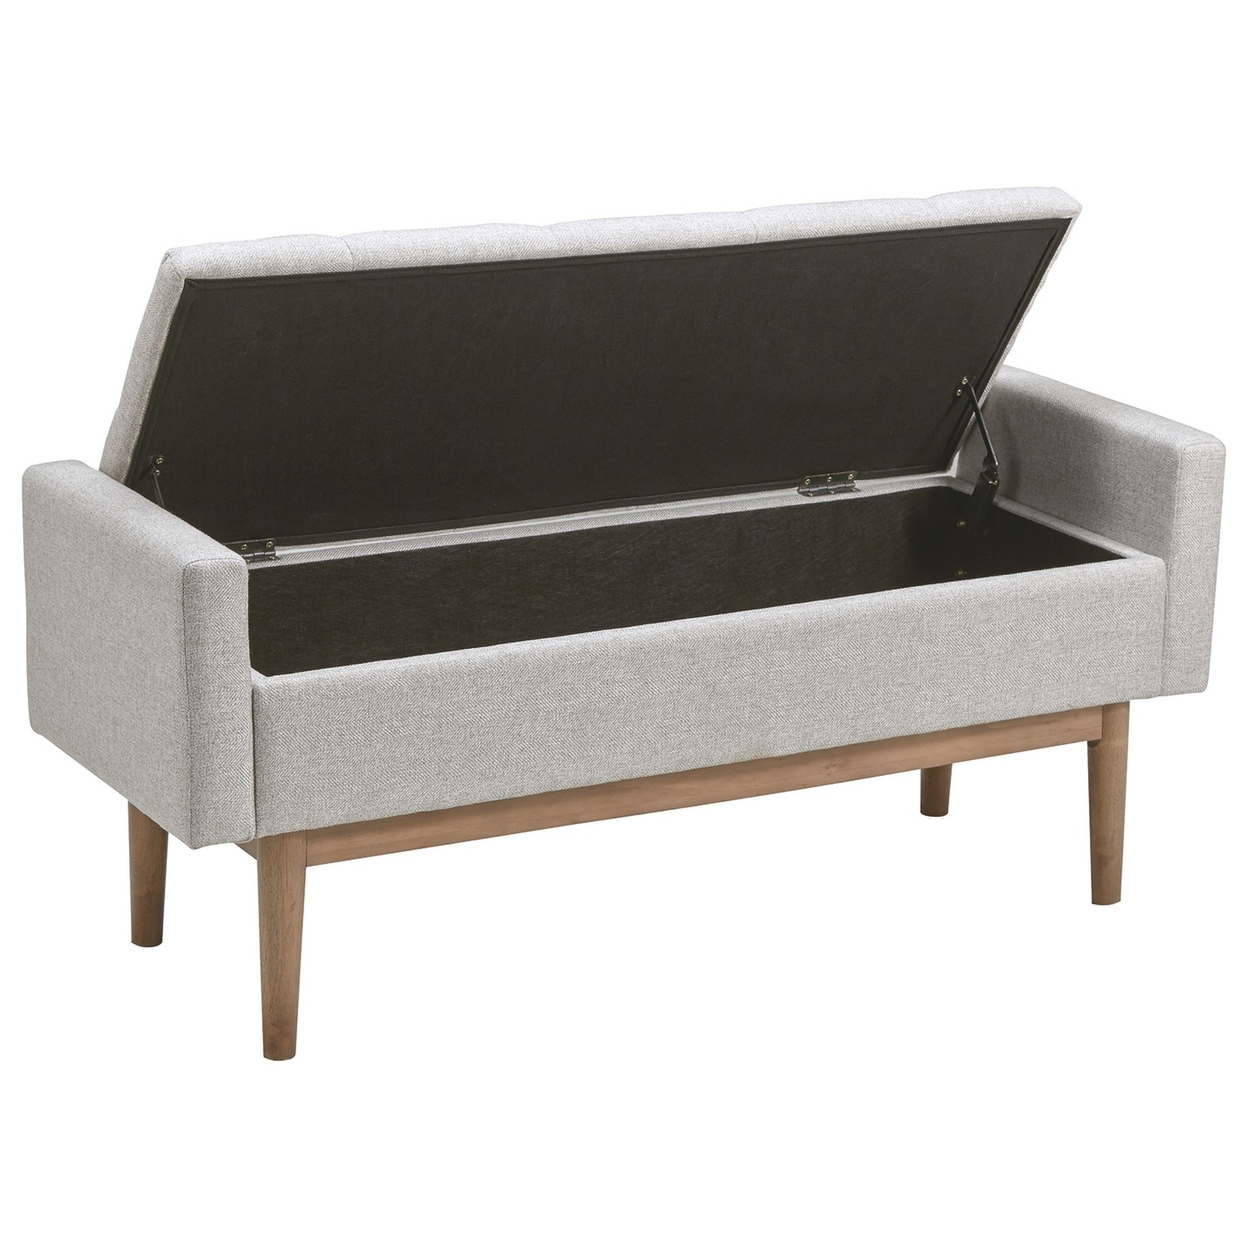 Tufted Fabric Storage Bench With Low Profile Elevated Arms, Light Gray- Saltoro Sherpi